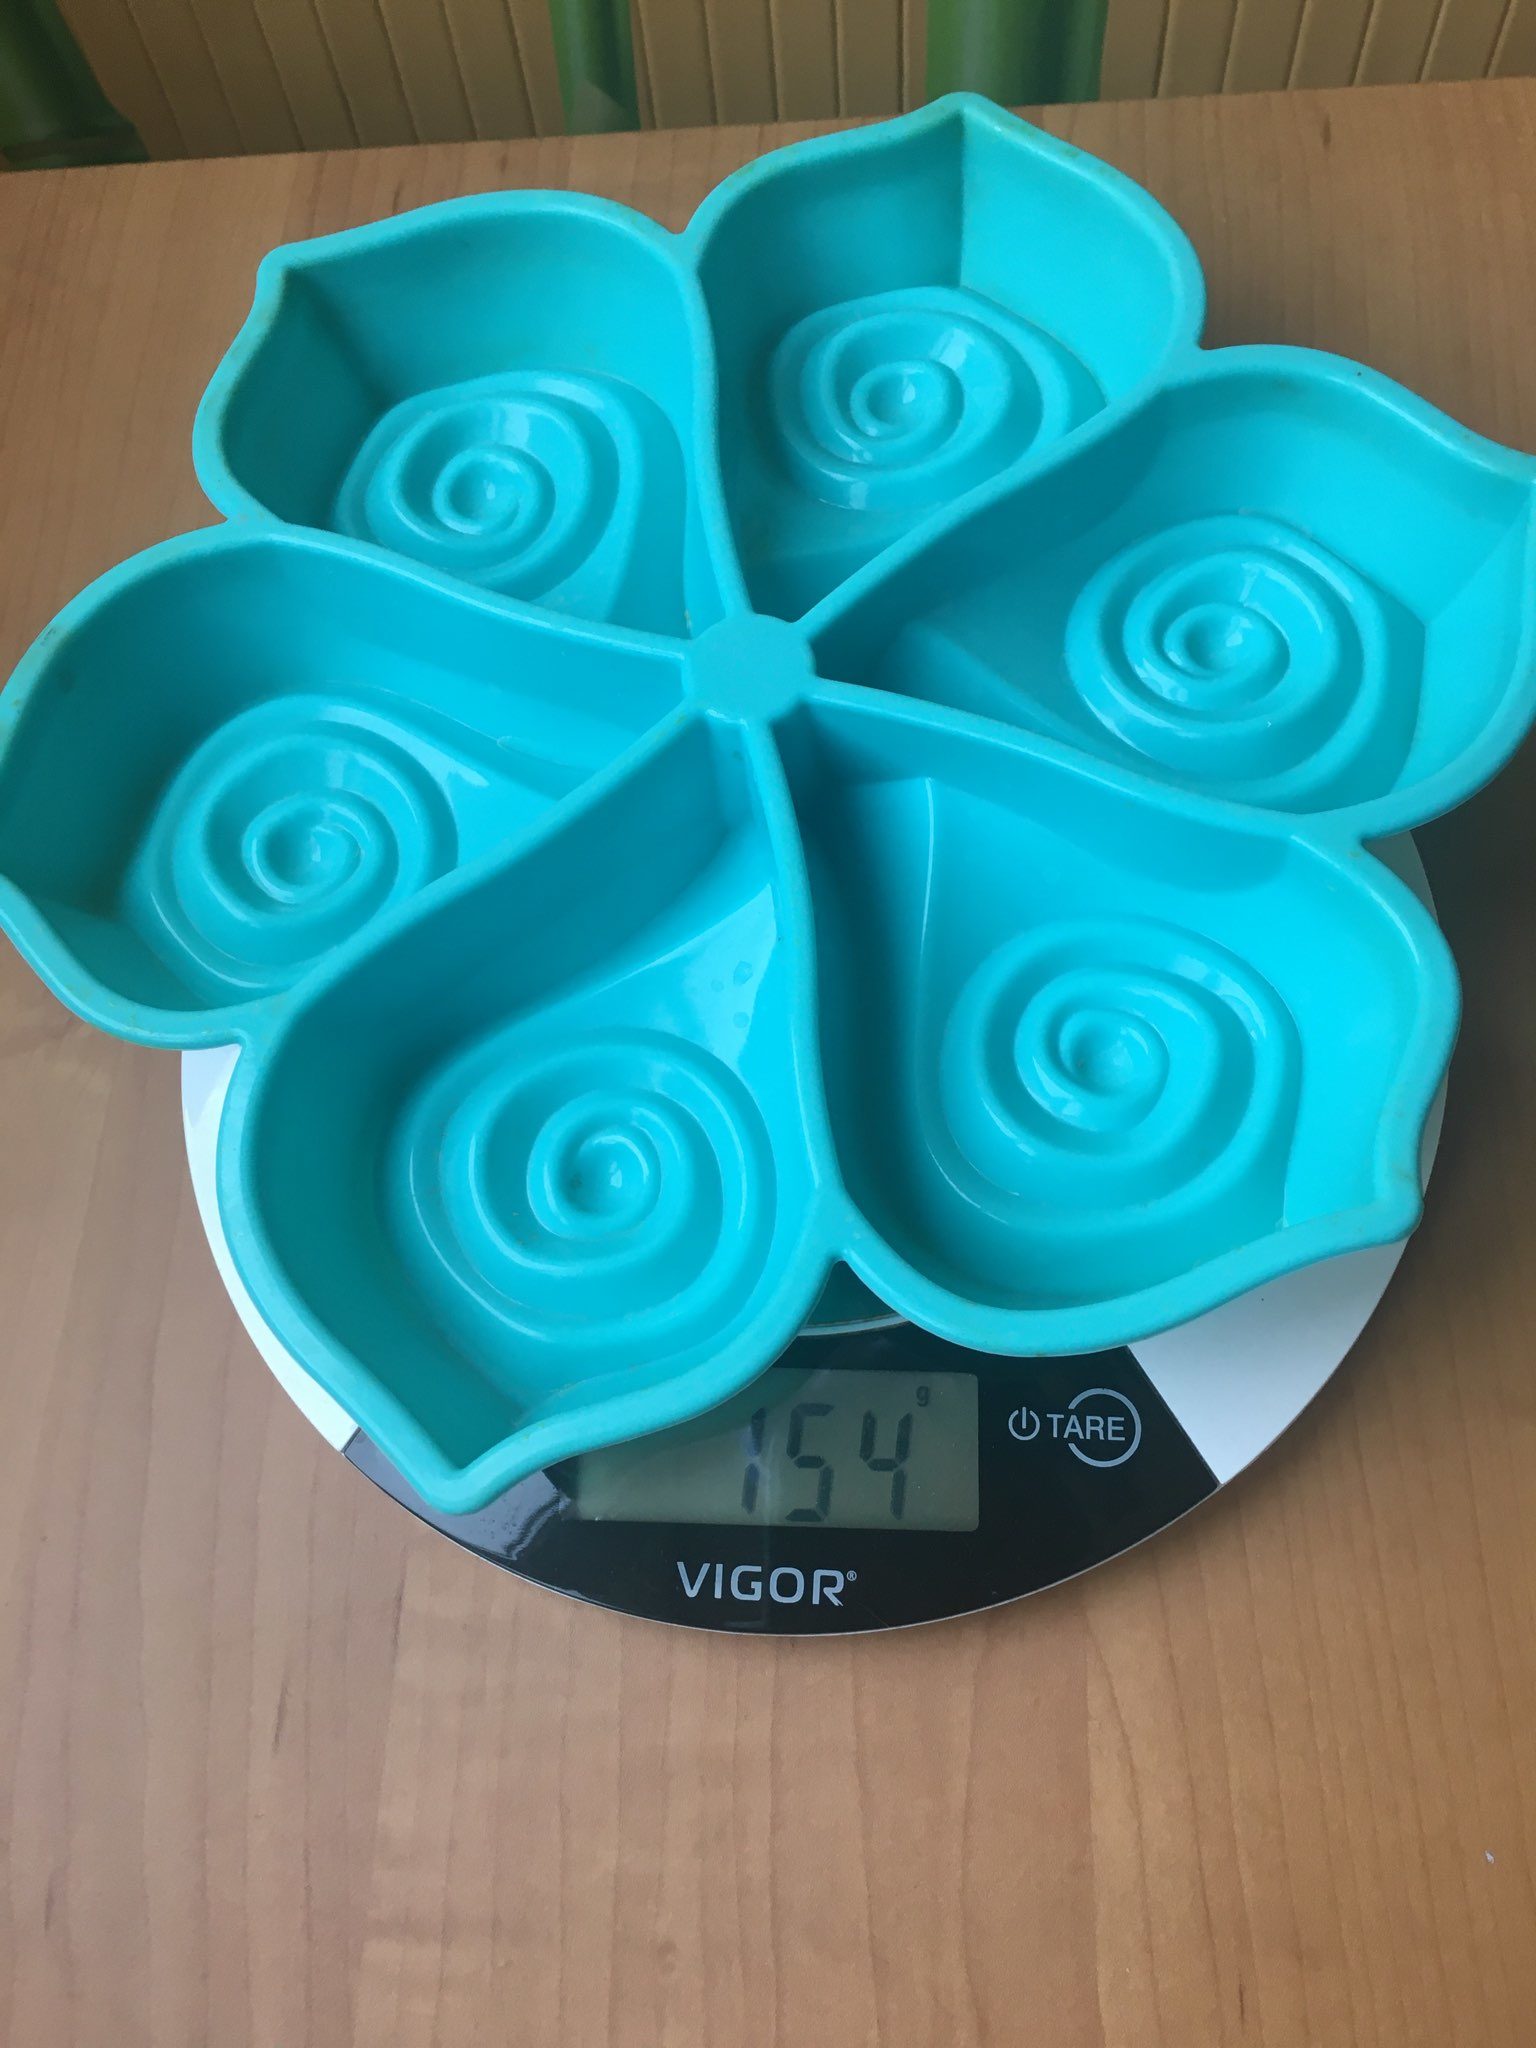 the weight of the silicone baking mould